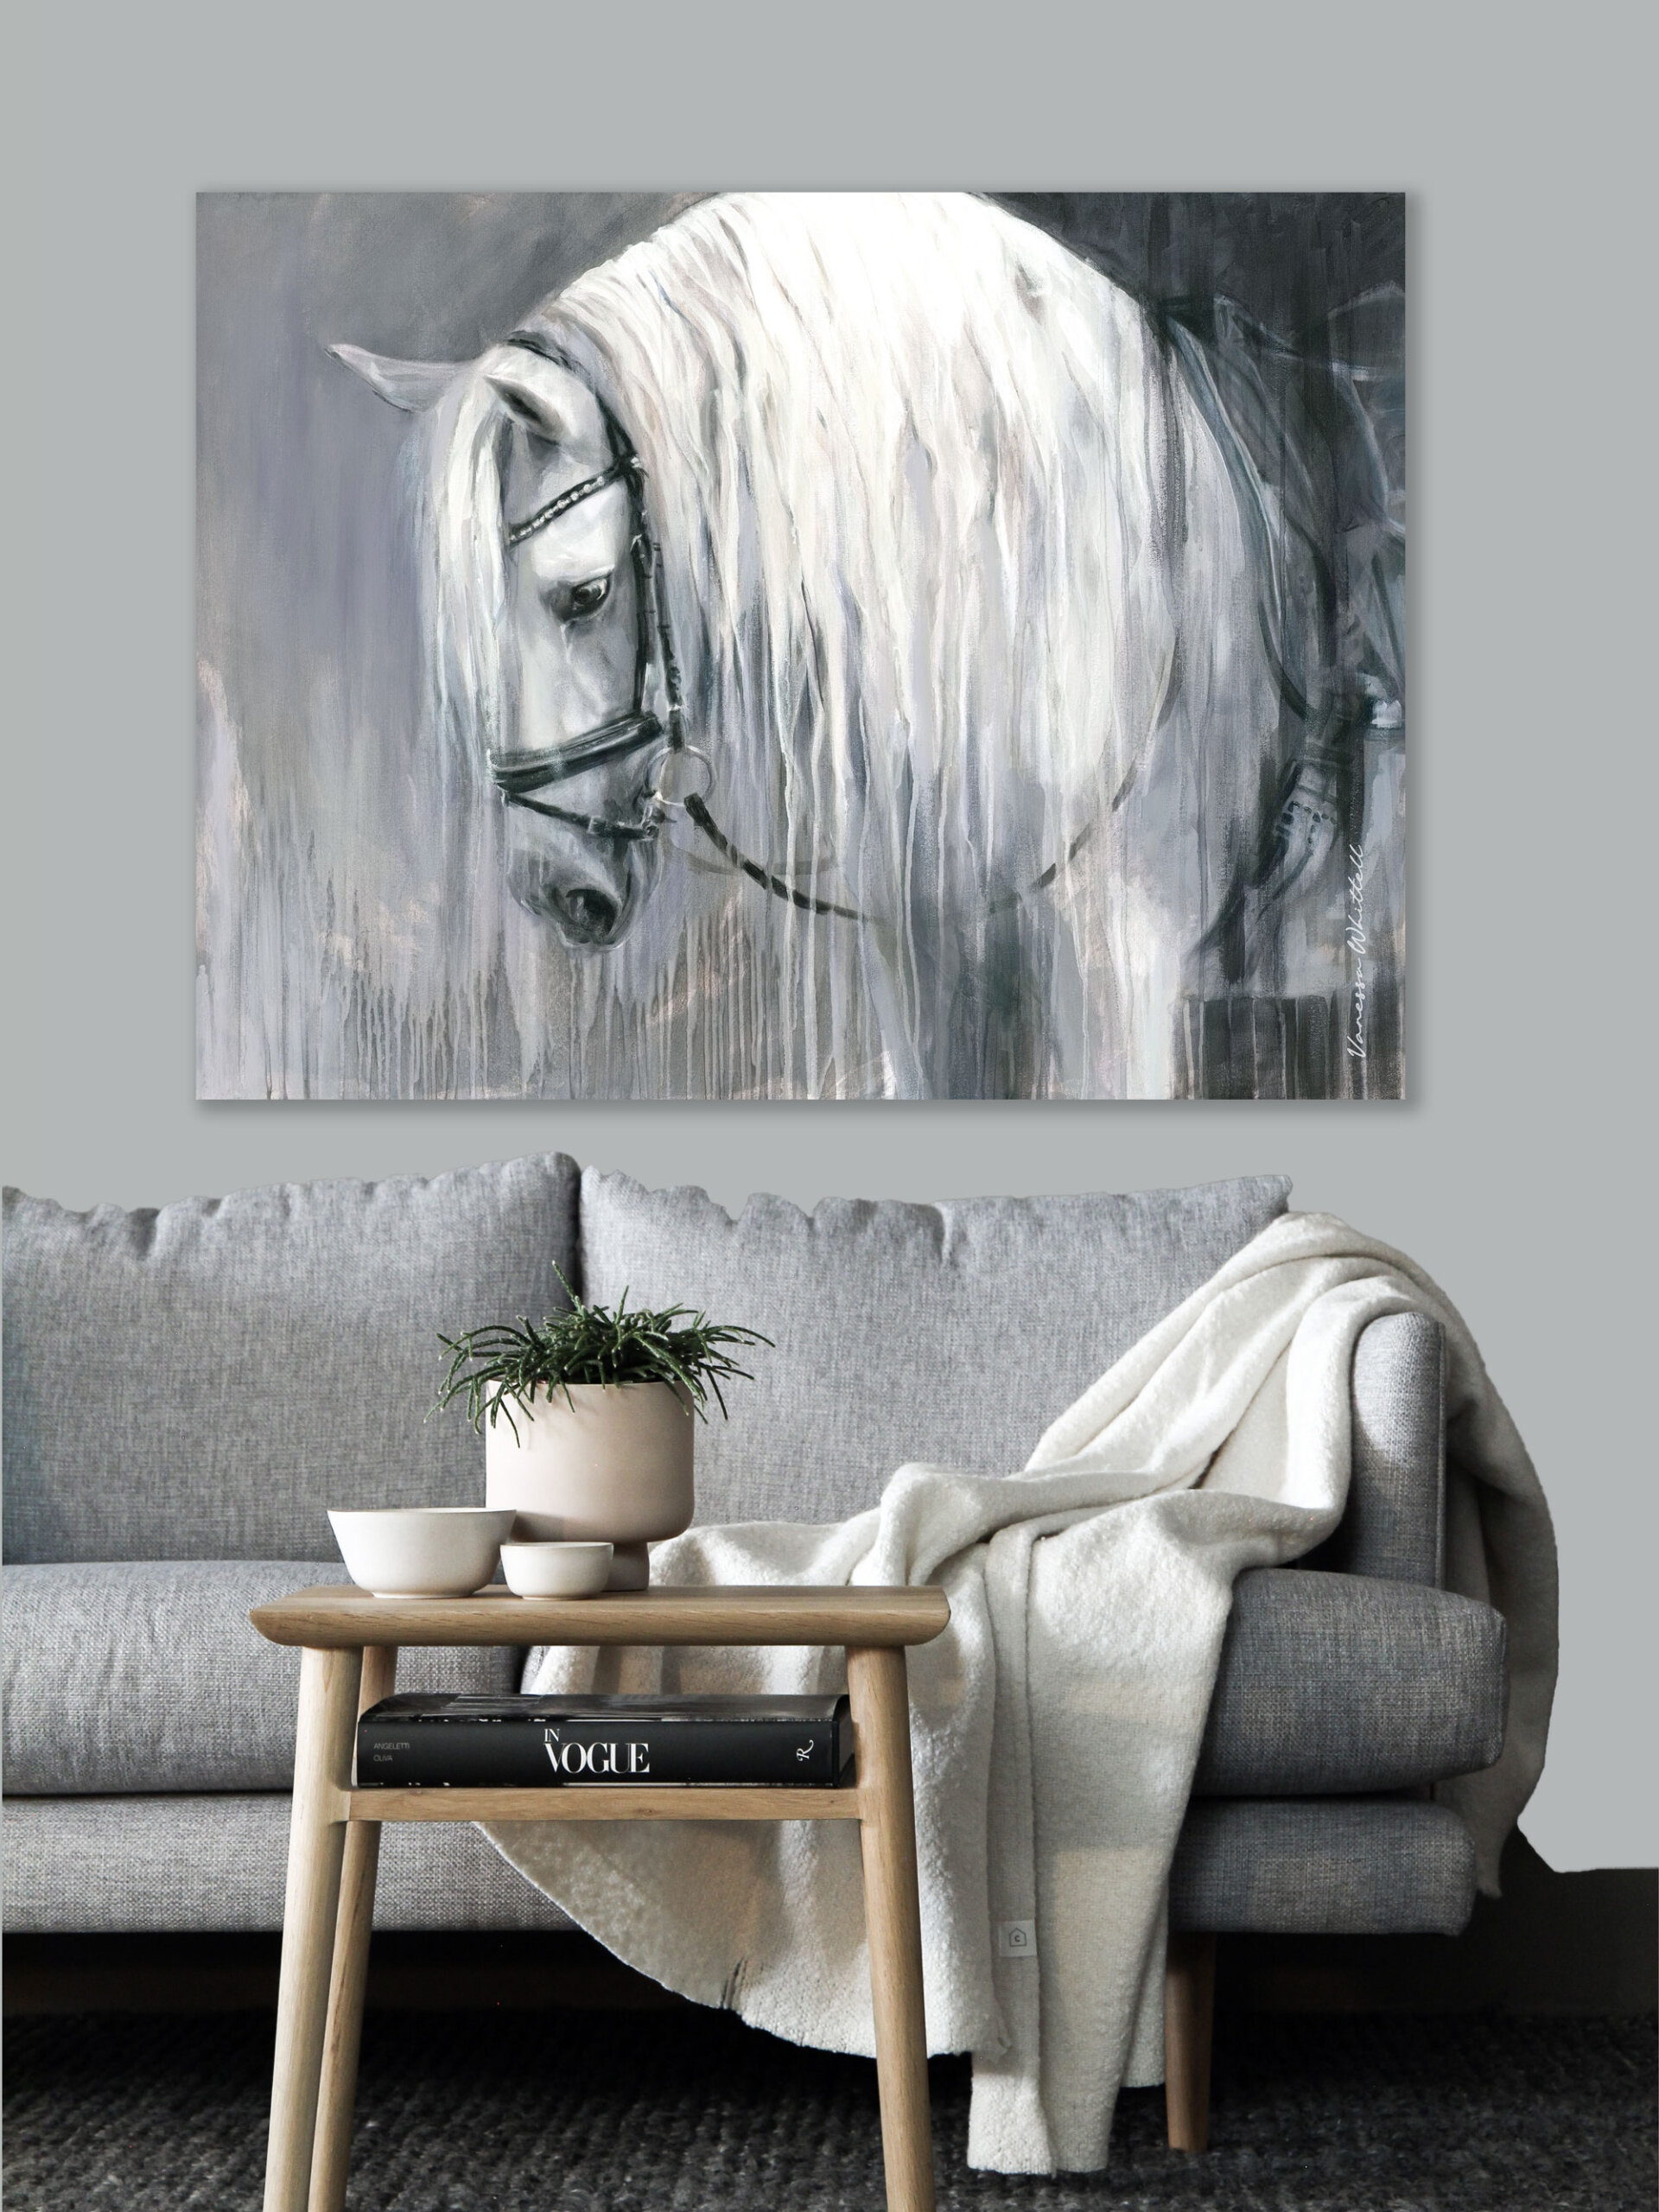 Custom horse portraits by Vanessa Whittell are available via her website.